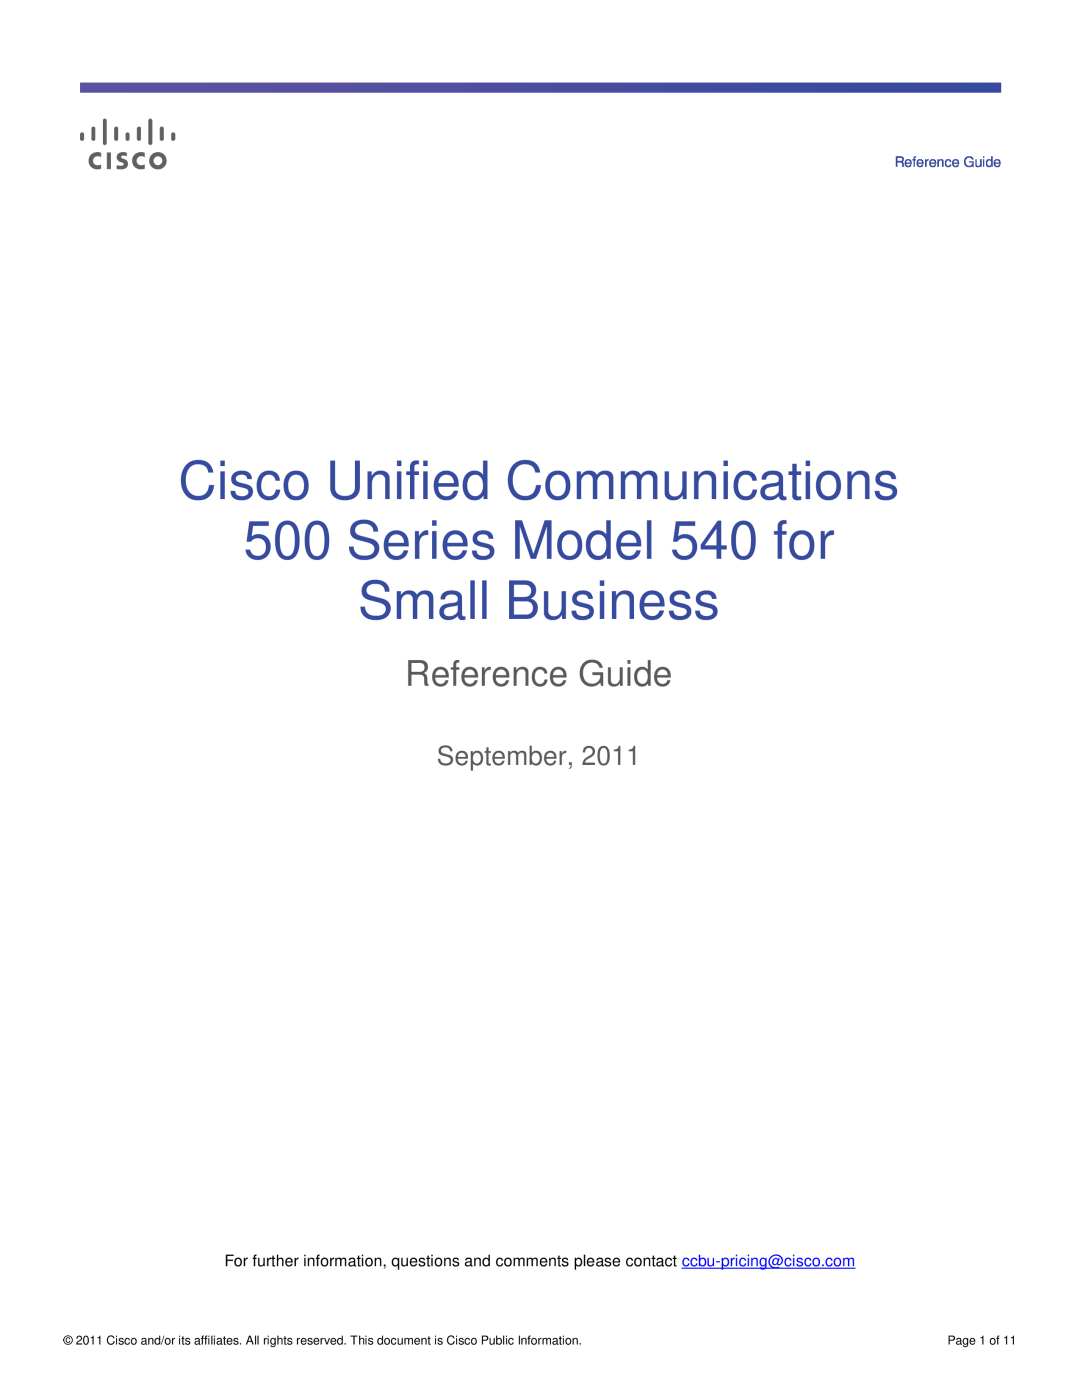 Cisco Systems UC540WFXOK9 manual Cisco Unified Communications 500 Series Model 540 for Small Business, Reference Guide 